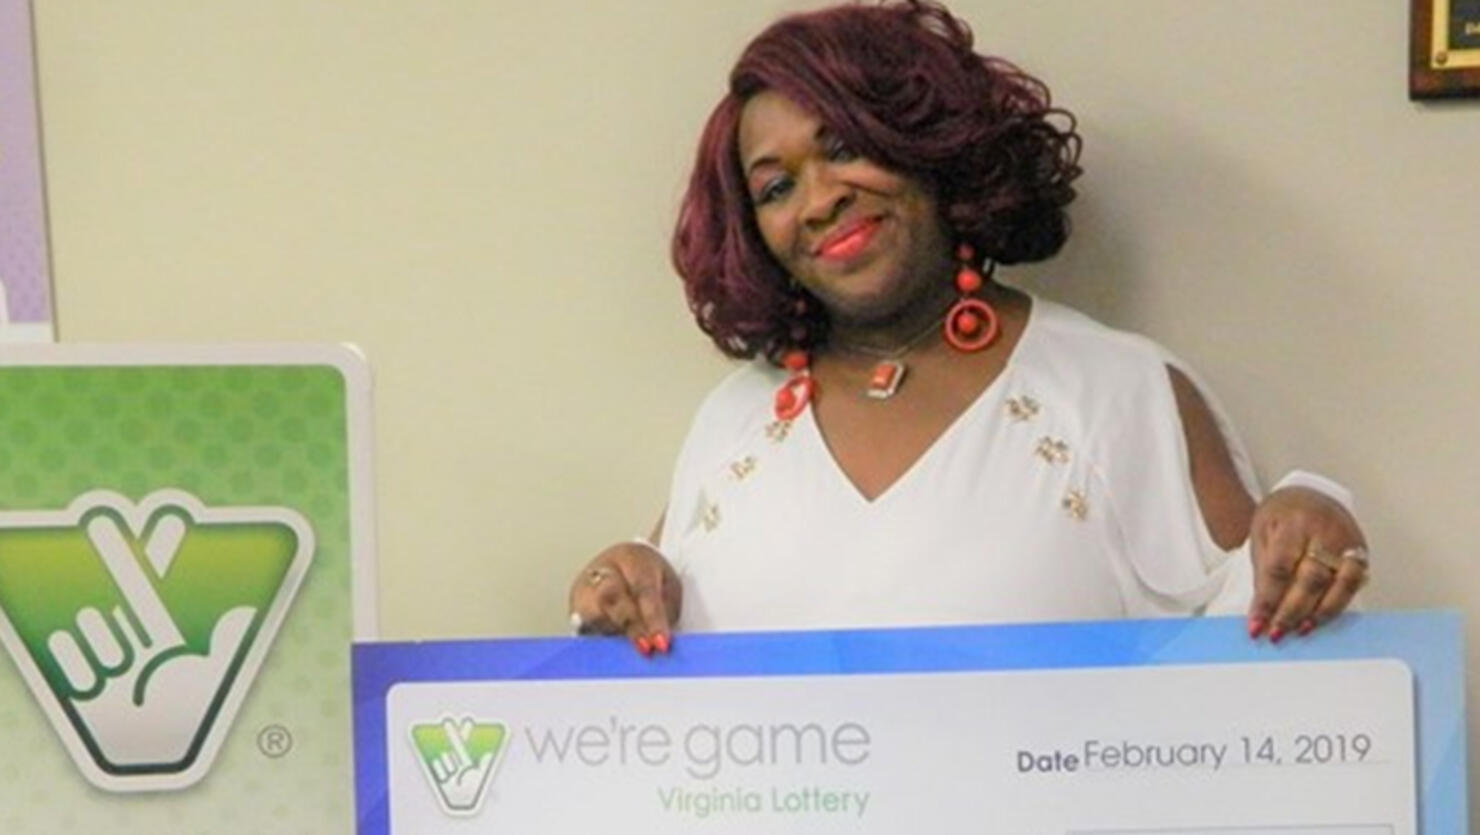 Deborah Brown holds a giant check after winning the lottery in Virginia